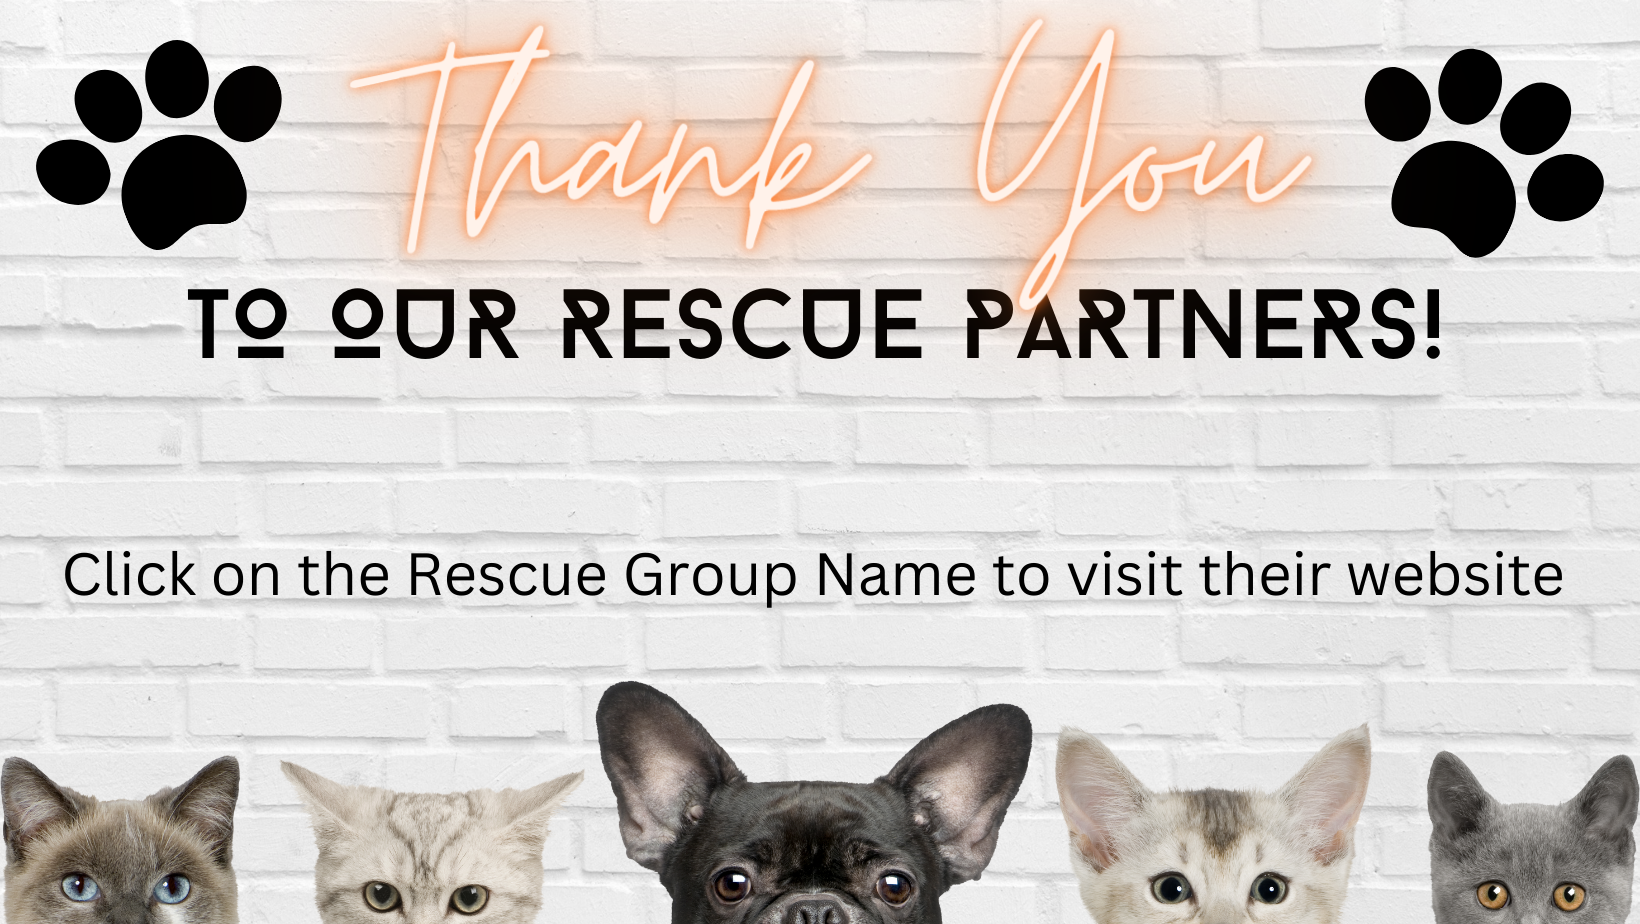 A sign with cats and dogs peeking from the bottom that says "Thank you to our rescue partners" and "Click the Rescue Group to be sent to their website"